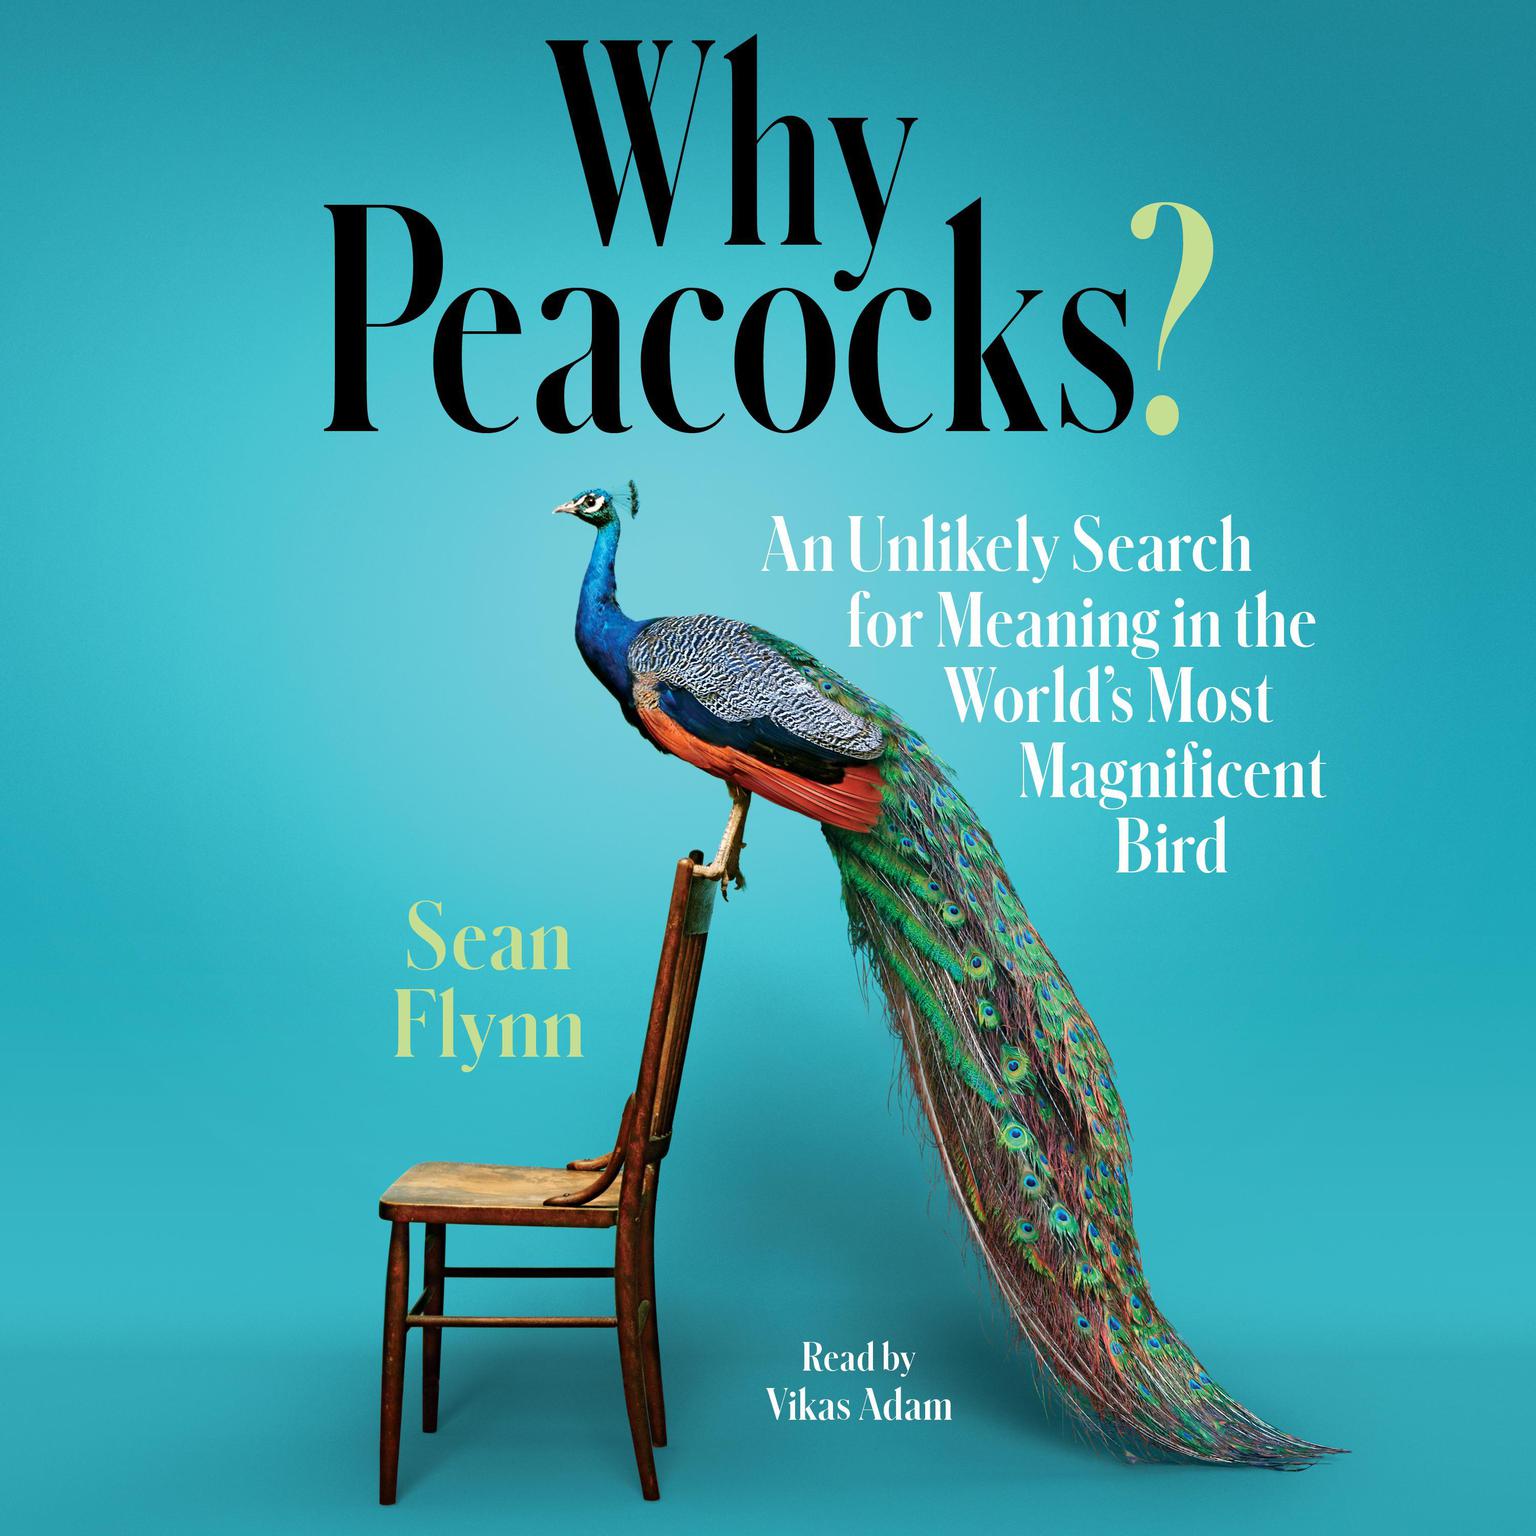 Why Peacocks?: An Unlikely Search for Meaning in the Worlds Most Magnificent Bird Audiobook, by Sean Flynn